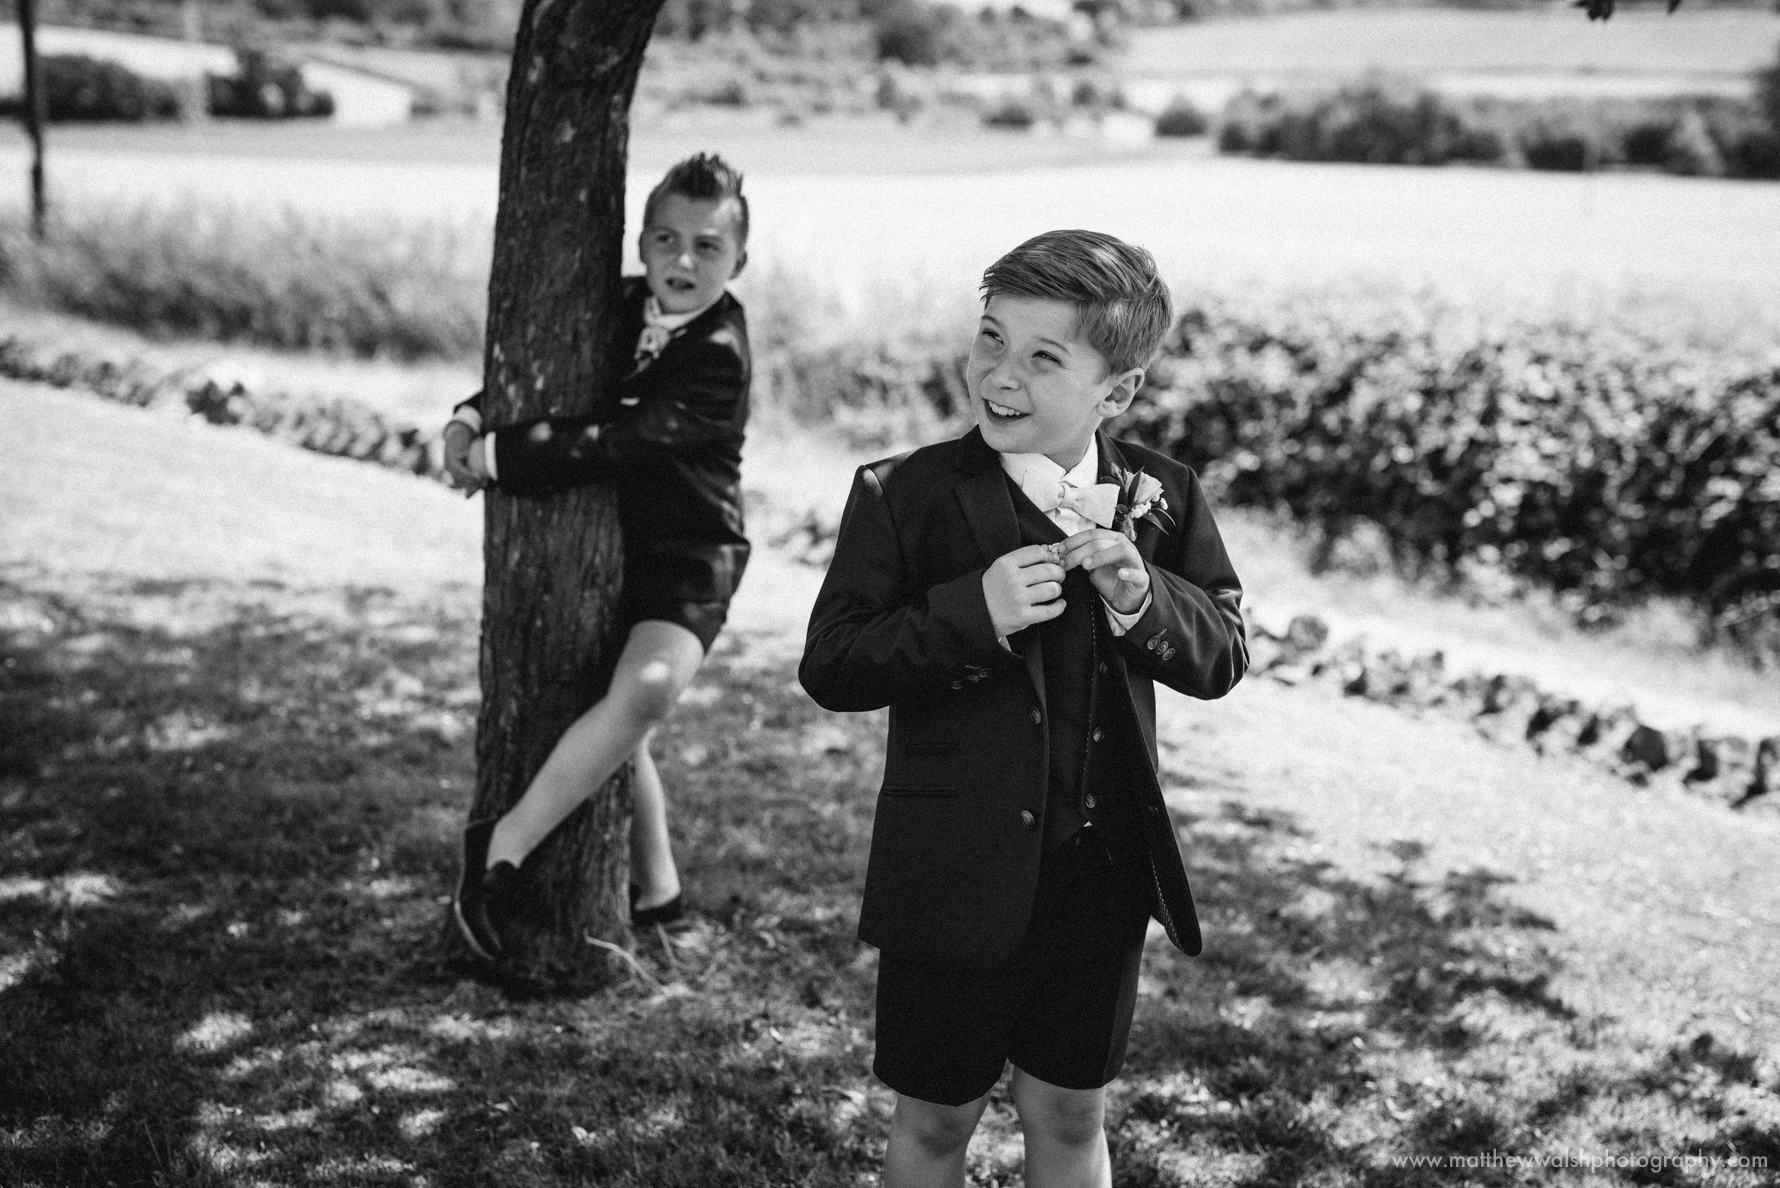 Pageboys in the shade looking very smart and stylish